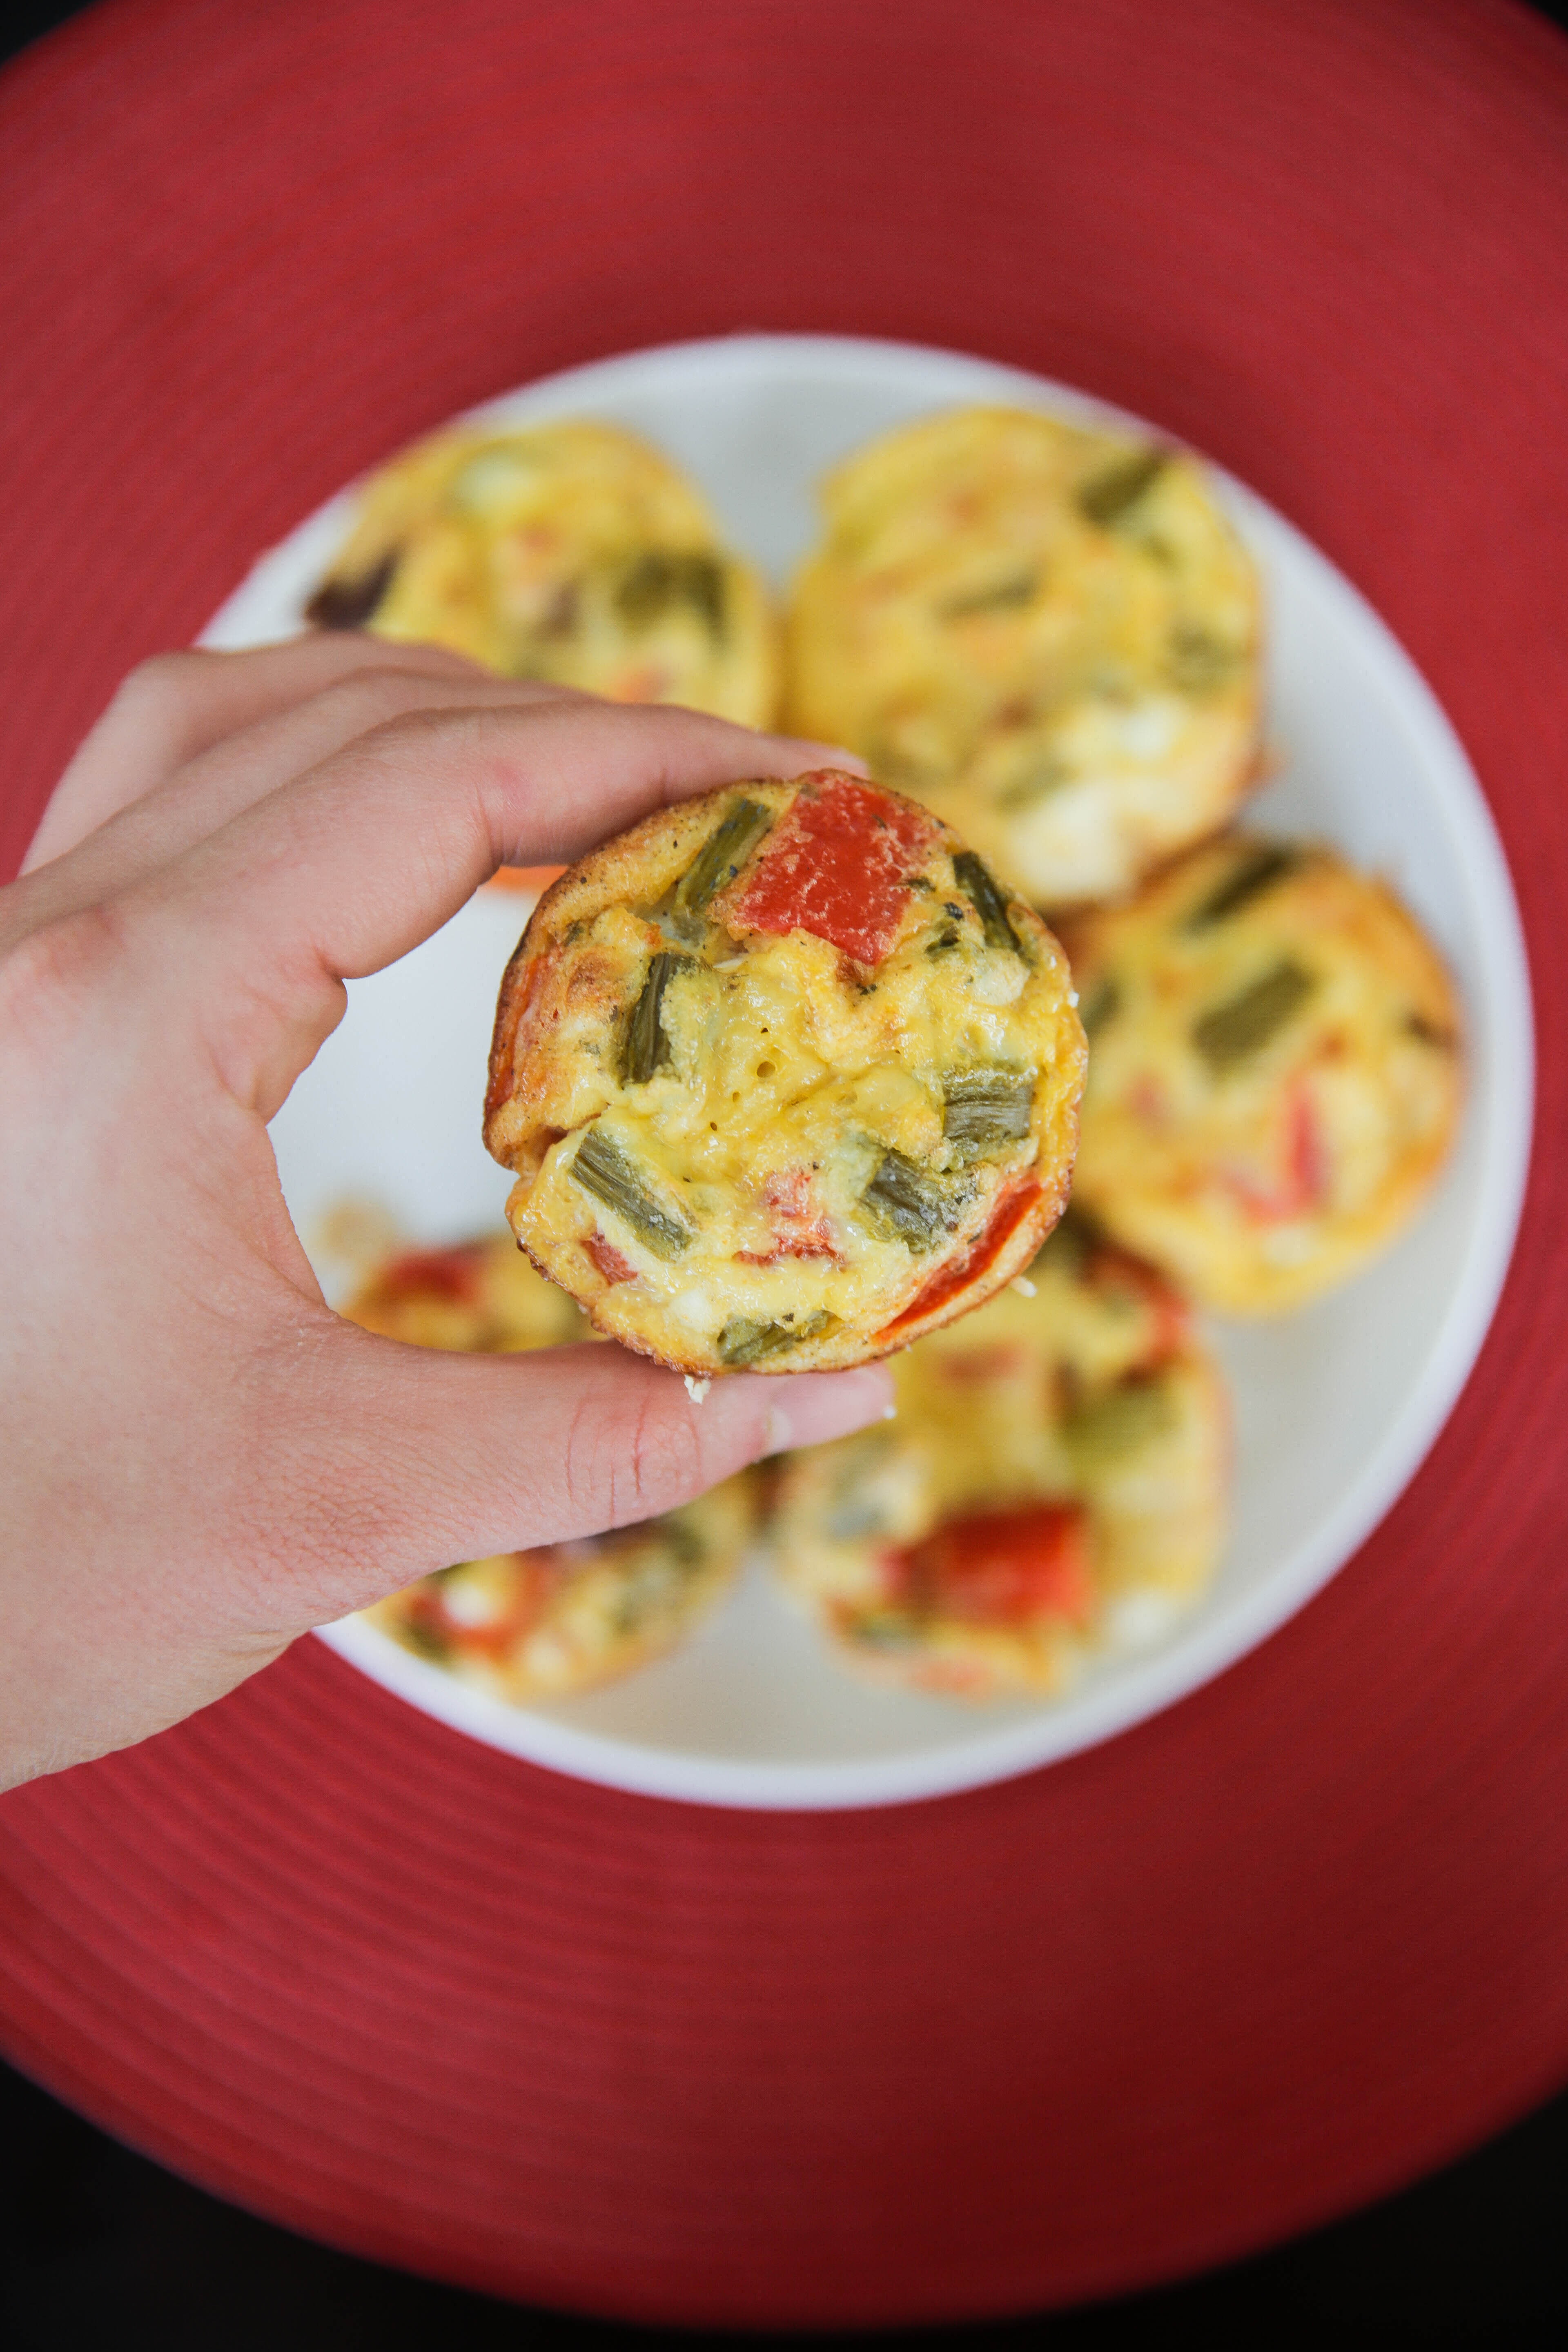 Eggs with legs: Mini Omelets on-the-go